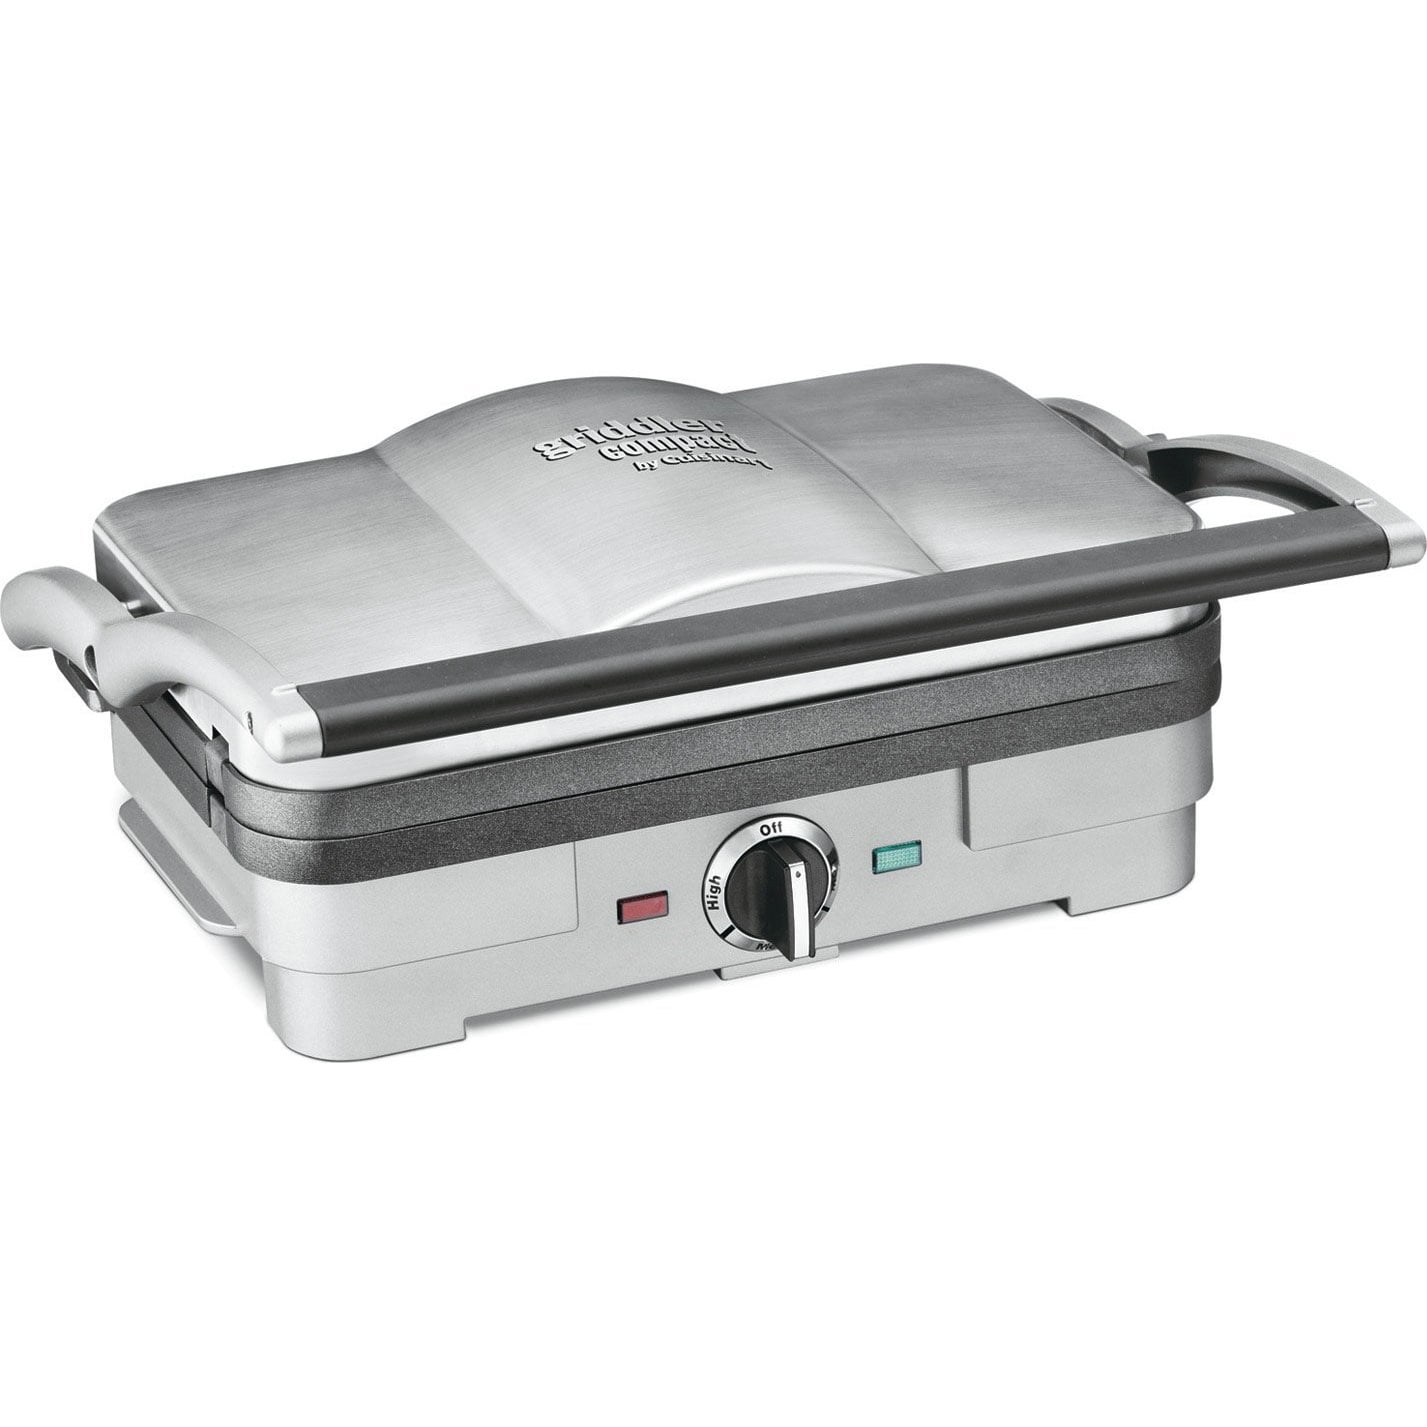 Hamilton Beach 25361 Searing Contact Grill - Silver for sale online